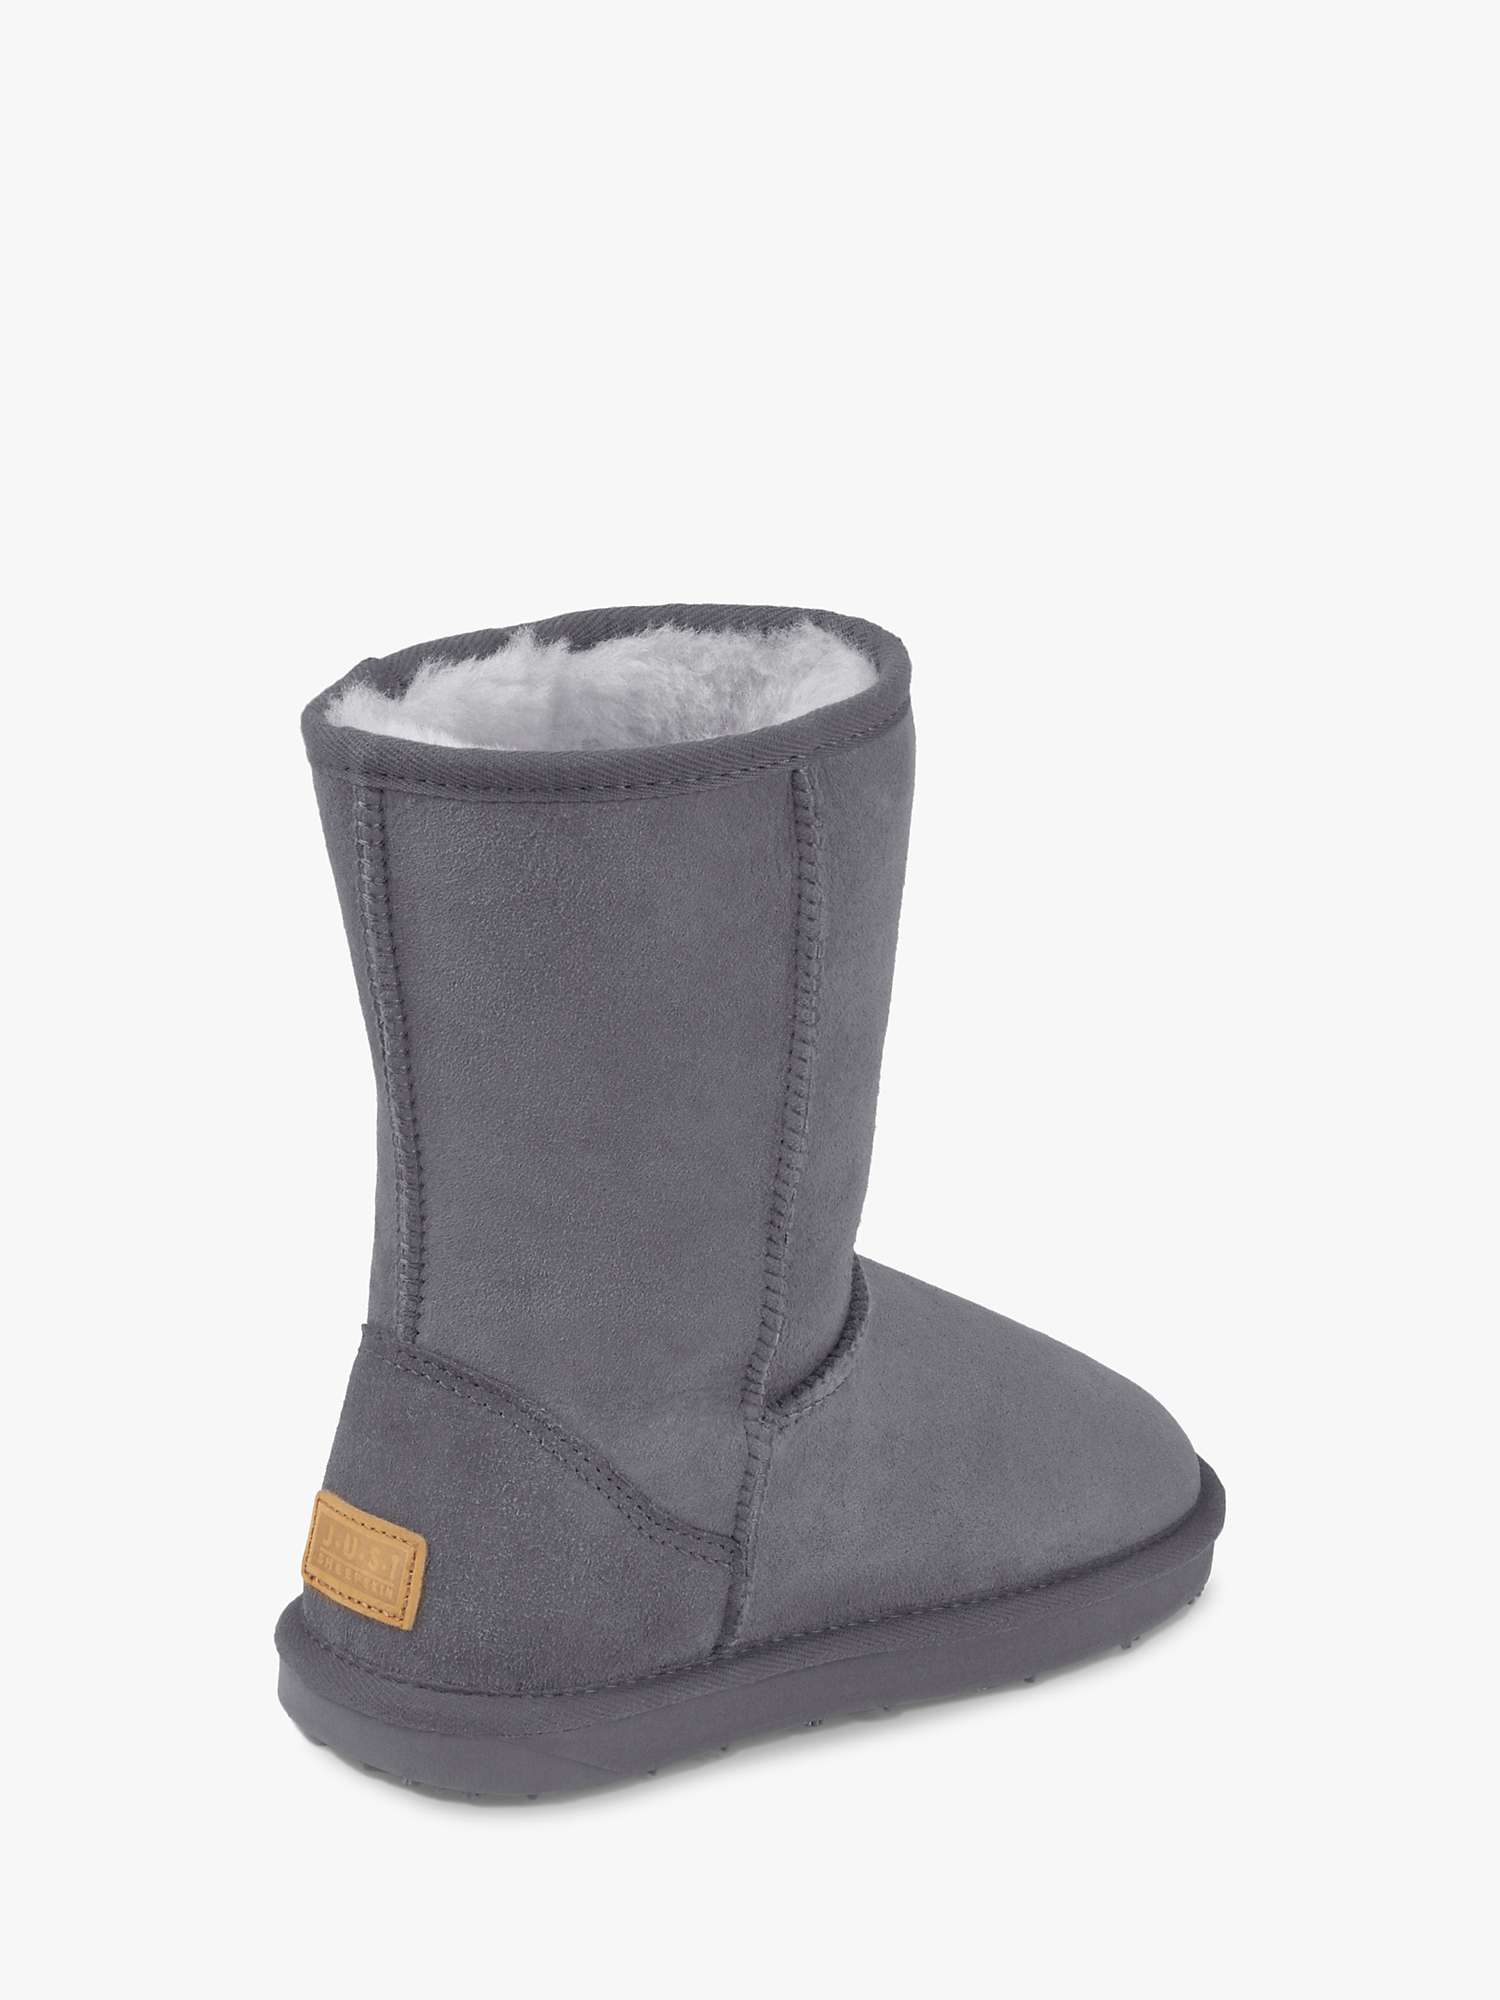 Buy Just Sheepskin Short Classic Ankle Boots Online at johnlewis.com